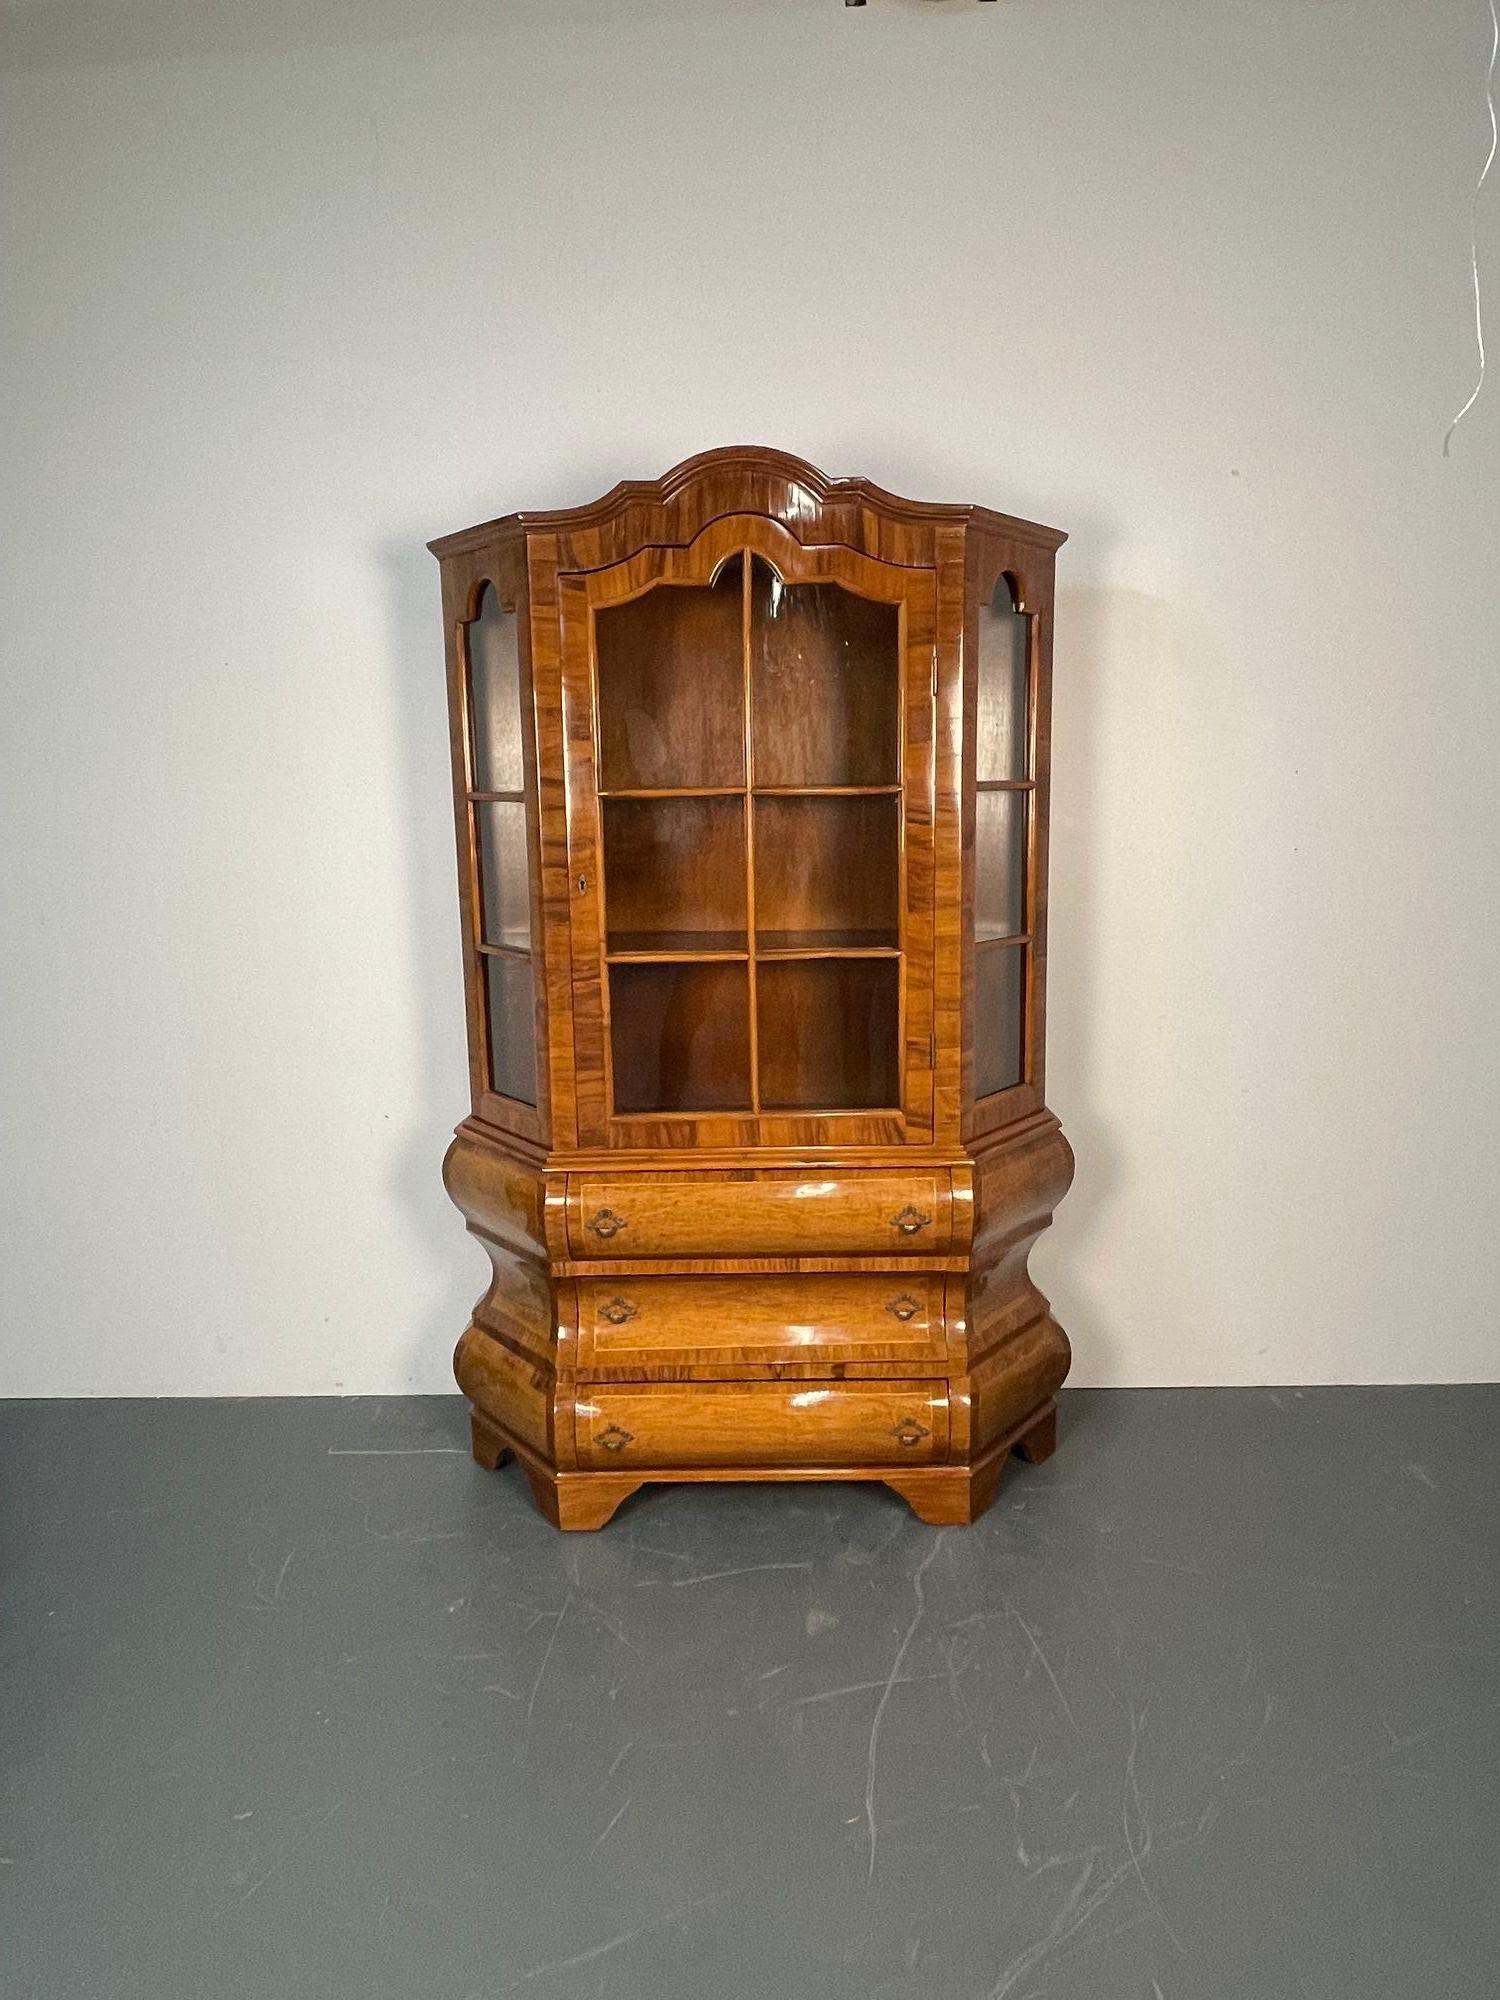 Italian Inlaid Venetian Burlwood Baroque Cabinet, Bookcase, Vitrine or Cupboard In Good Condition For Sale In Stamford, CT